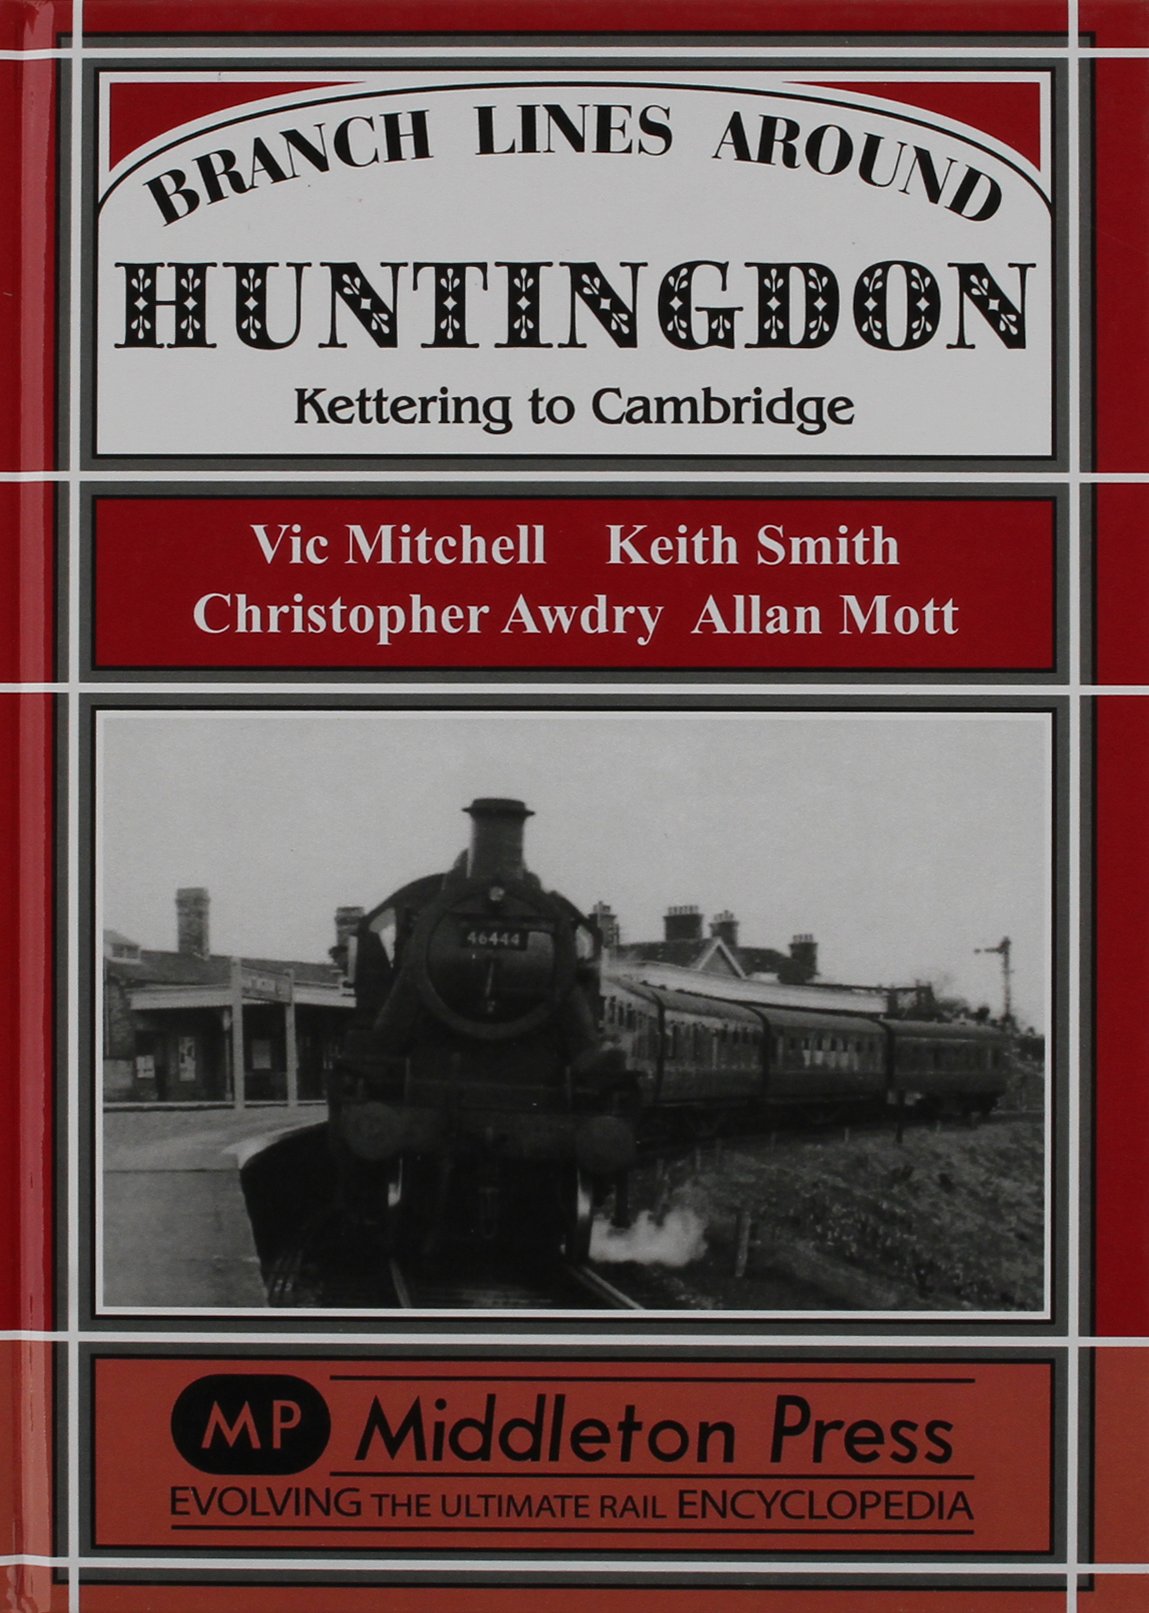 Branch Lines around Huntingdon from Kettering to Cambridge OUT OF PRINT TO BE REPRINTED